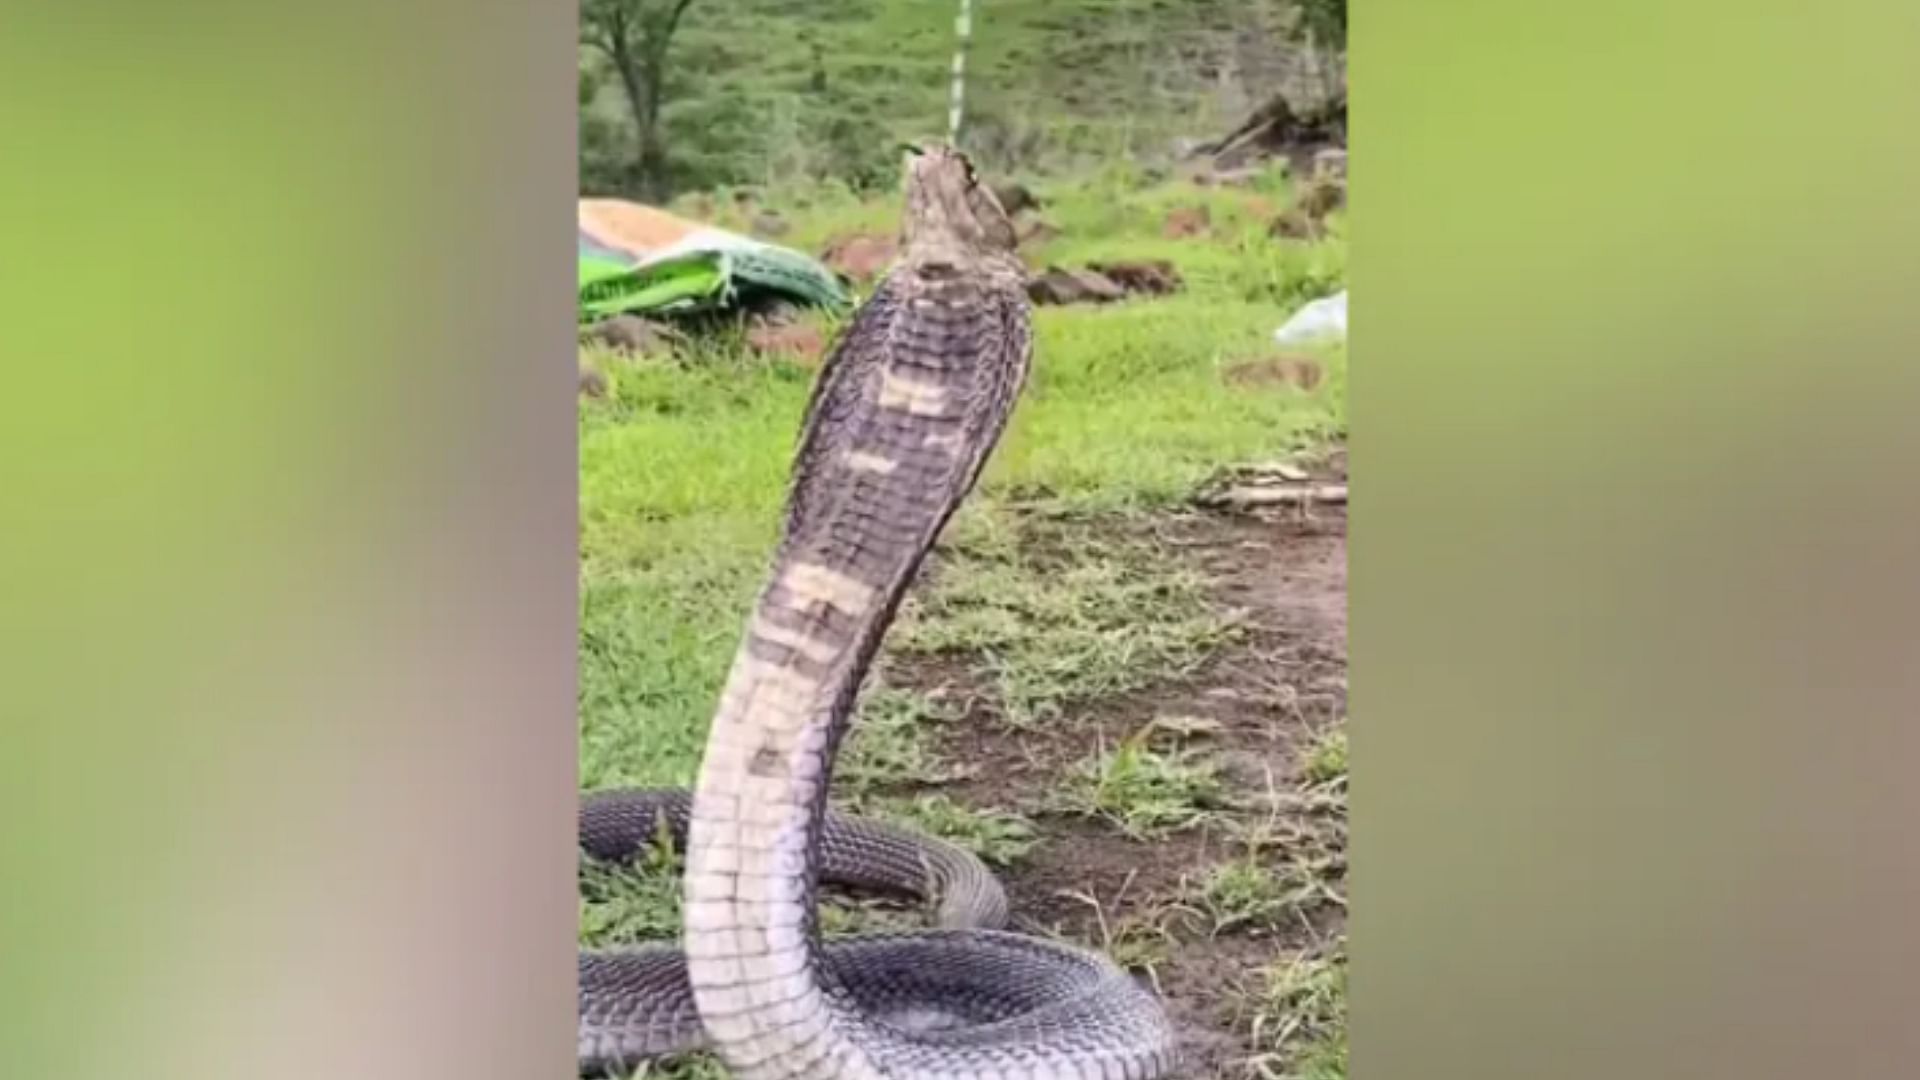 Man Gives Water To Thirsty Snake Video Went Viral On Social Media